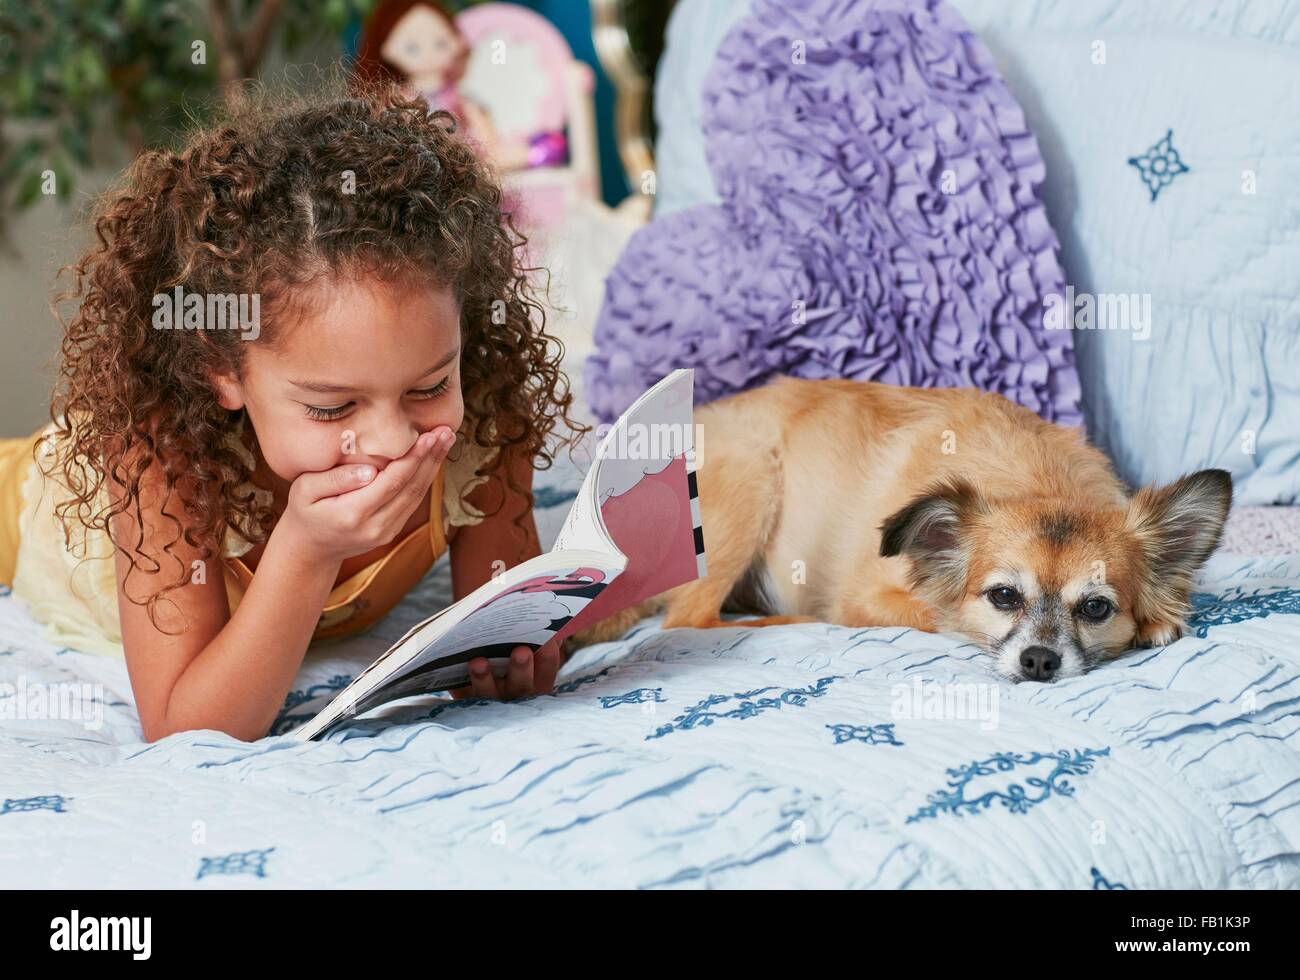 Girl and dog lying on bed reading book, main sur la bouche de rire Banque D'Images